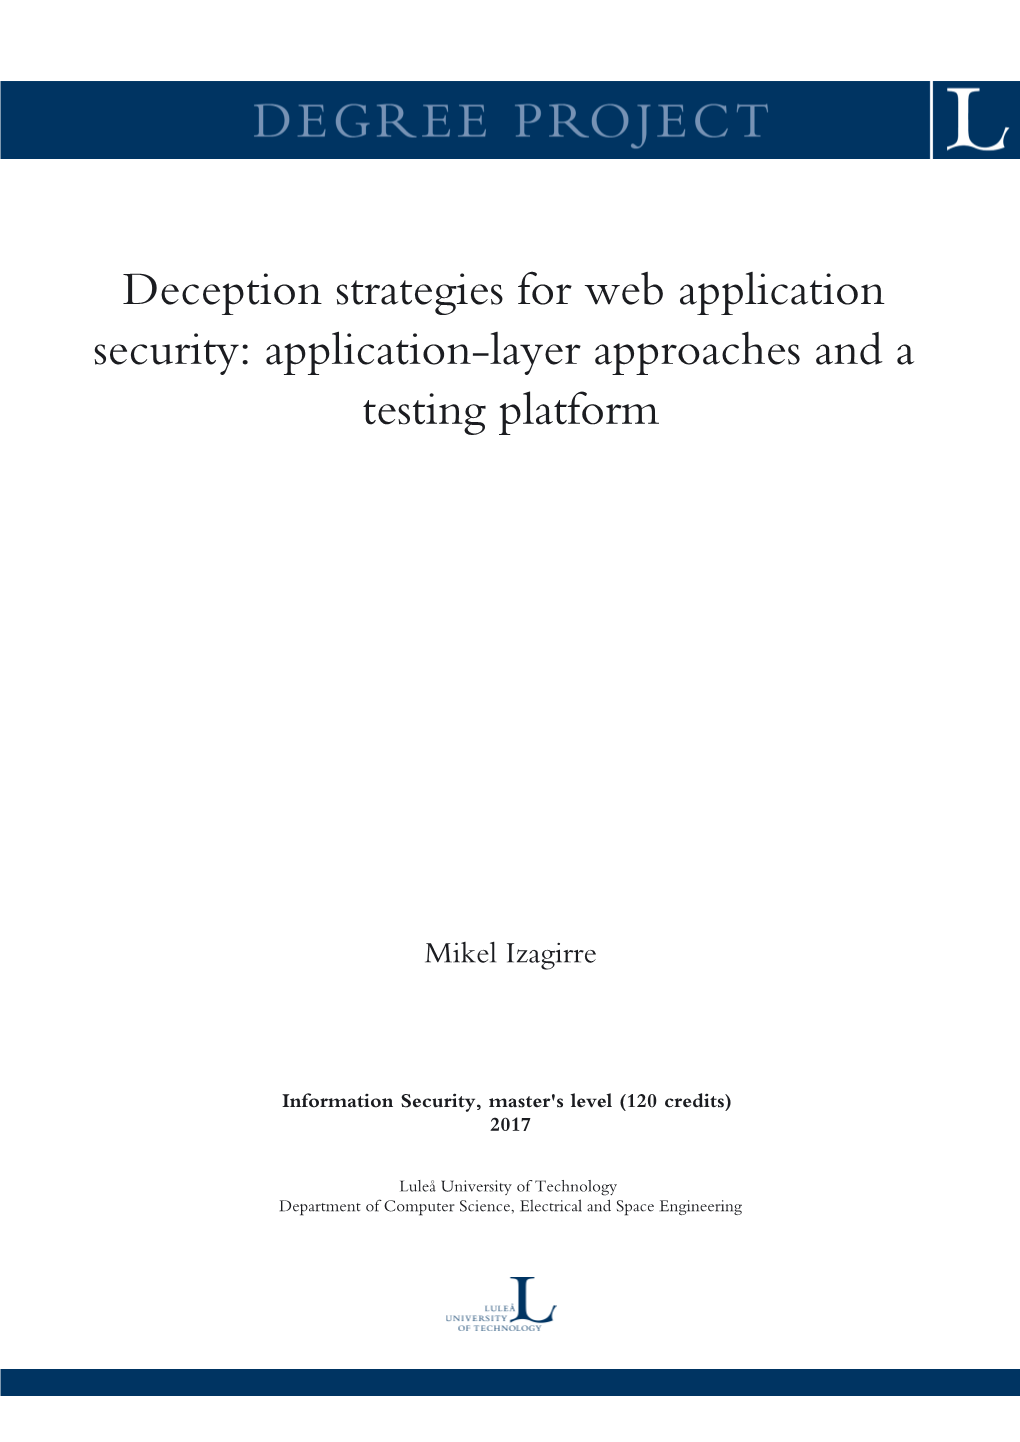 Deception Strategies for Web Application Security: Application-Layer Approaches and a Testing Platform